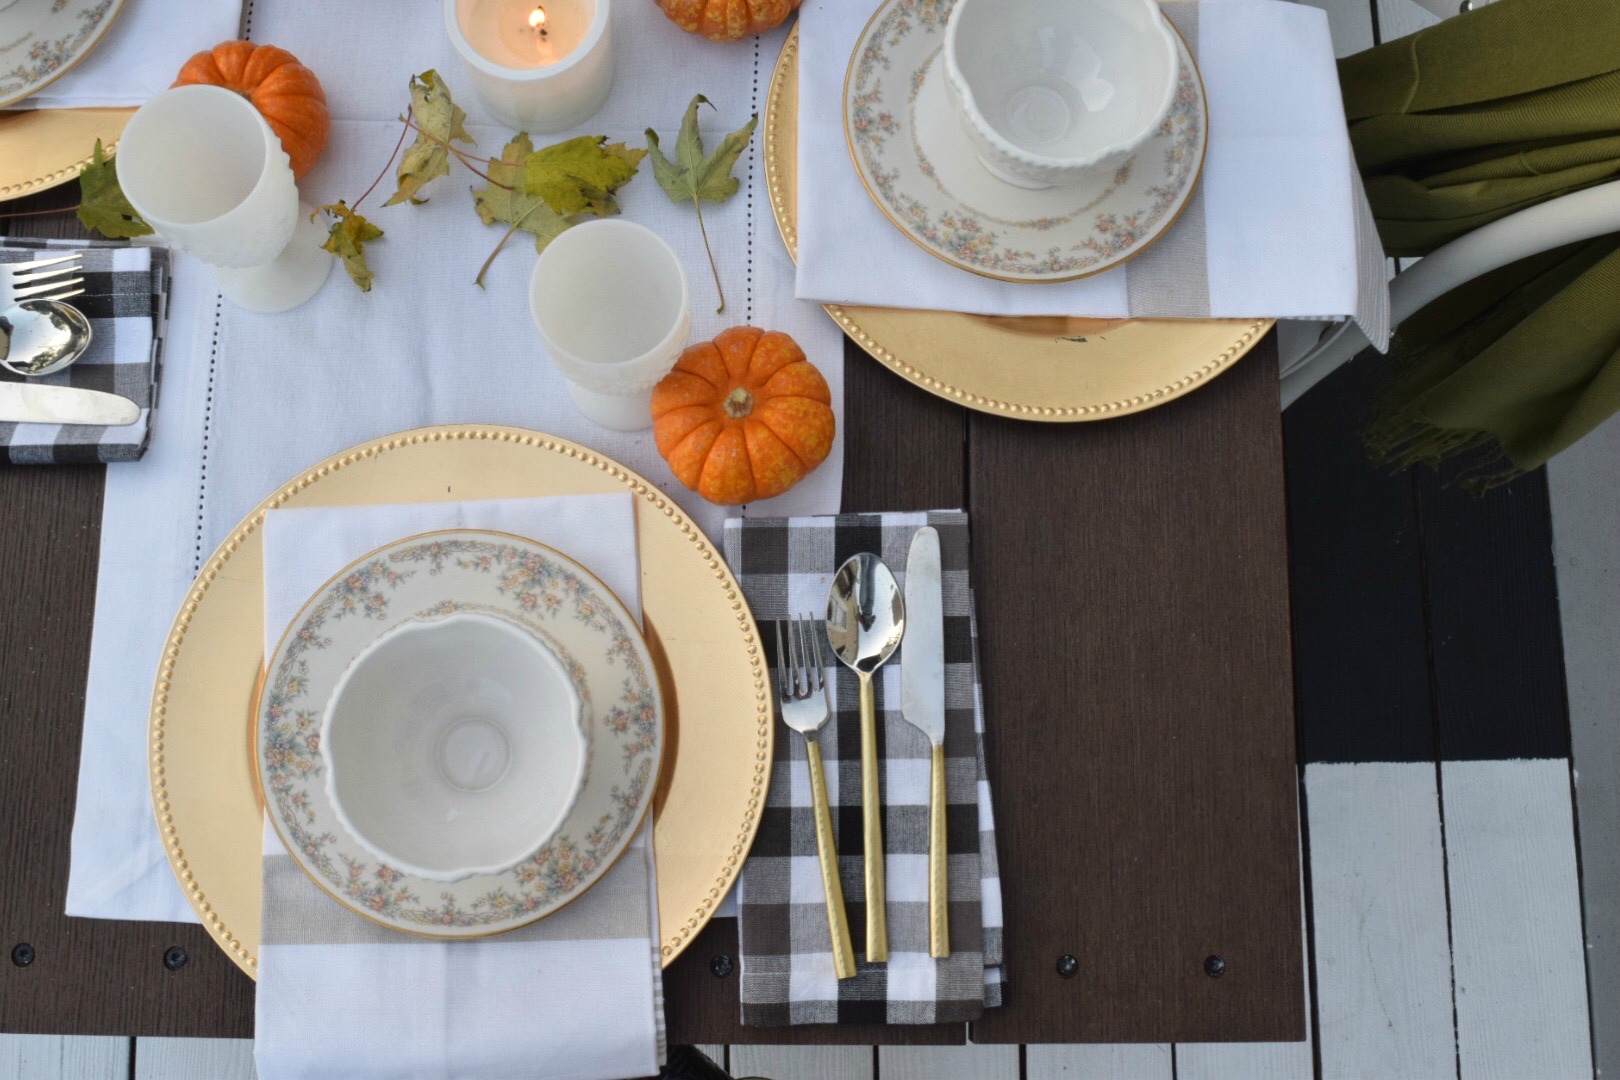 Fall Table Setting- Simple Using What You Have